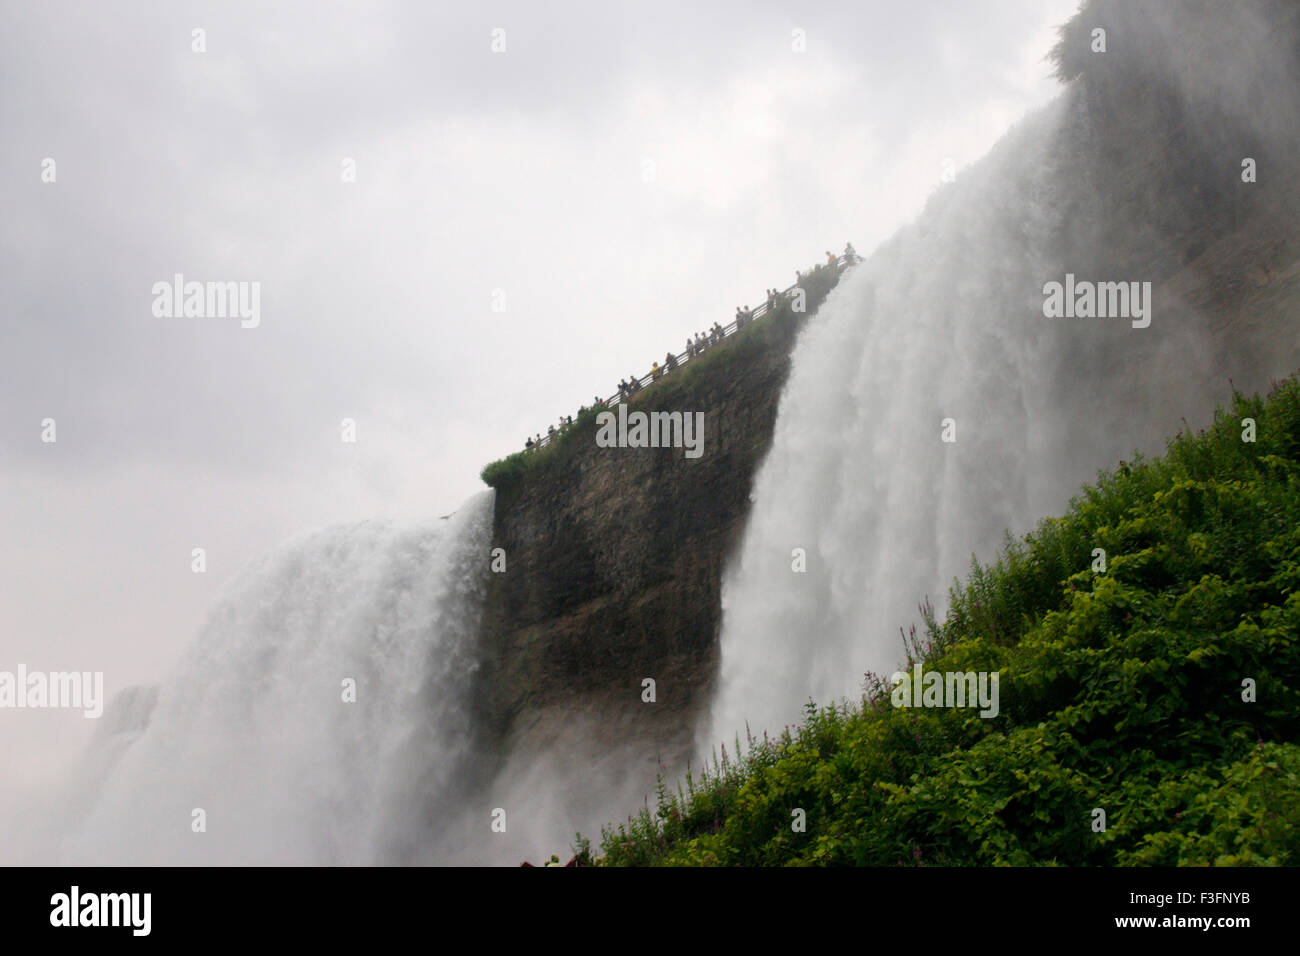 Niagra fall on overcast and rainy day ; U.S.A. United States of America Stock Photo